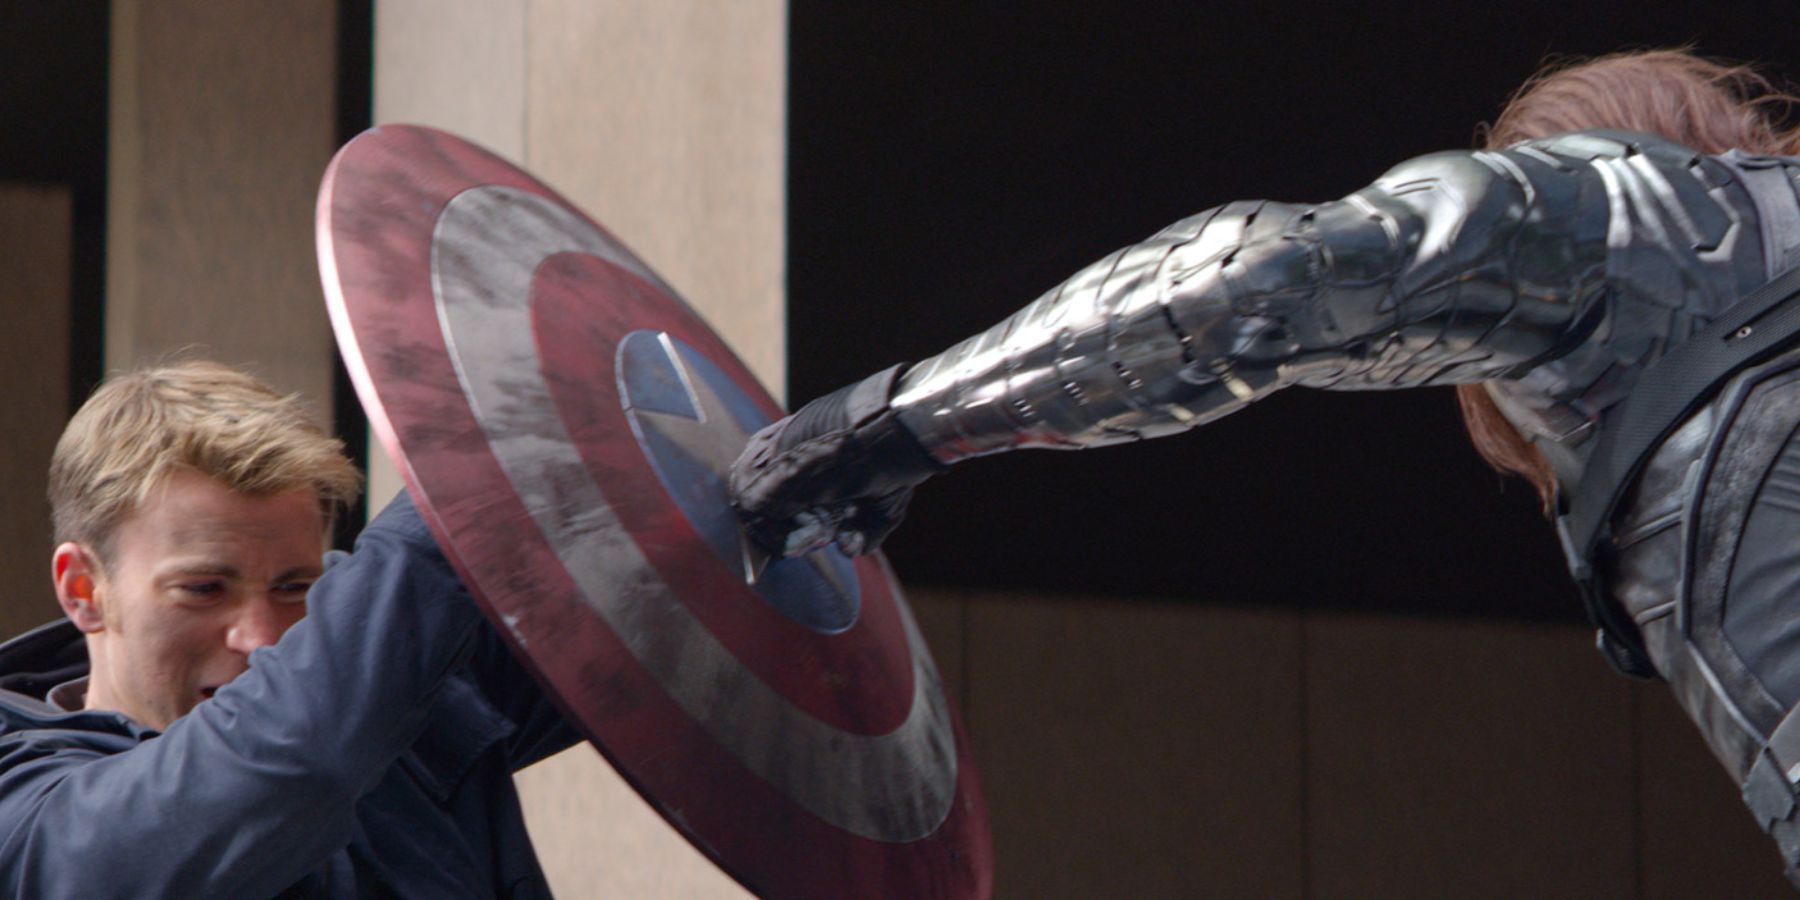 The Winter soldier punches Captain America's shield